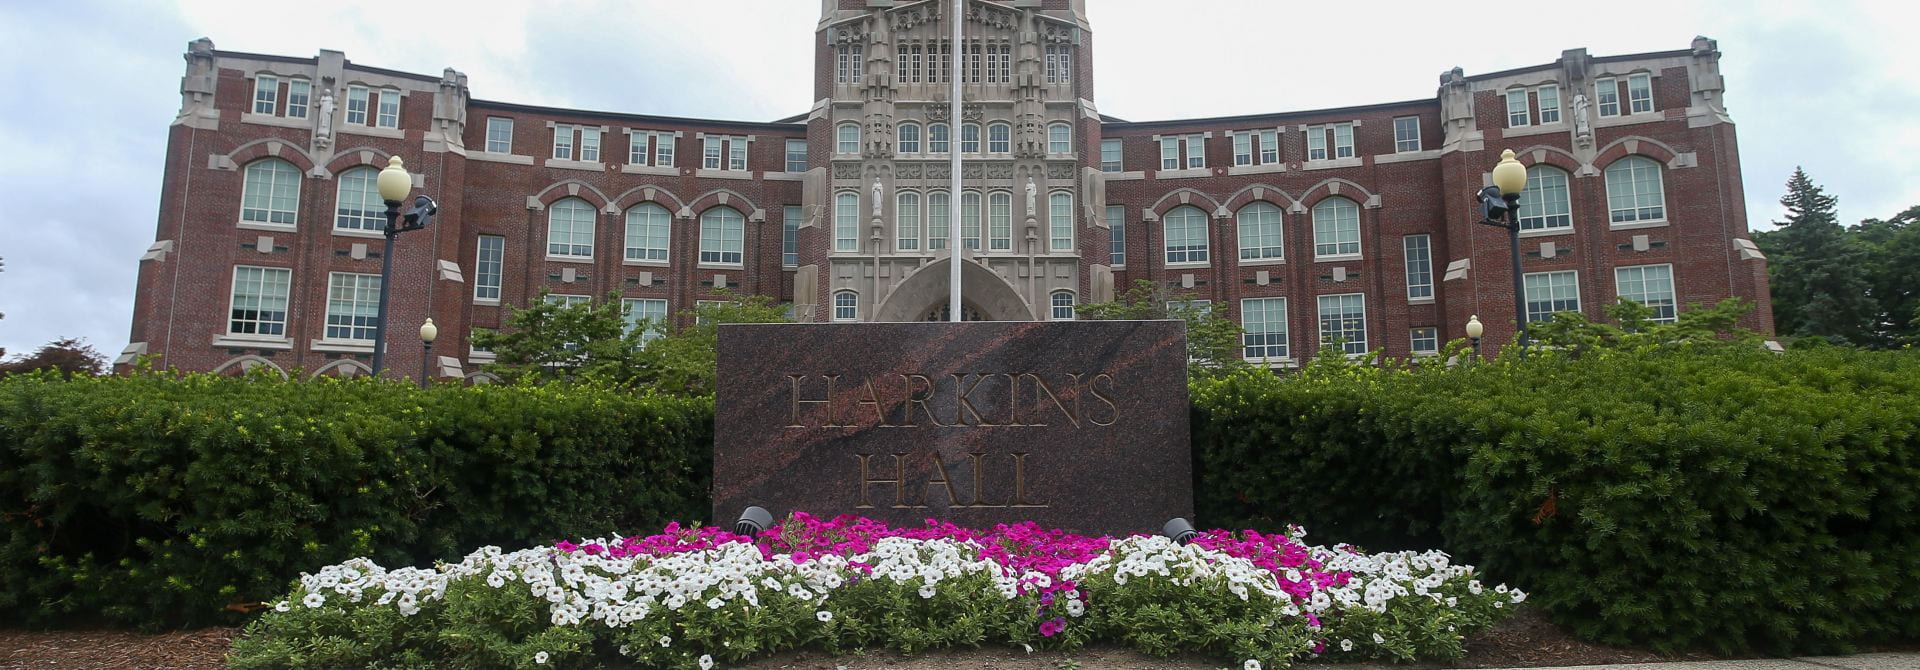 Harkins Hall with Flowers in Bloom and American Flag